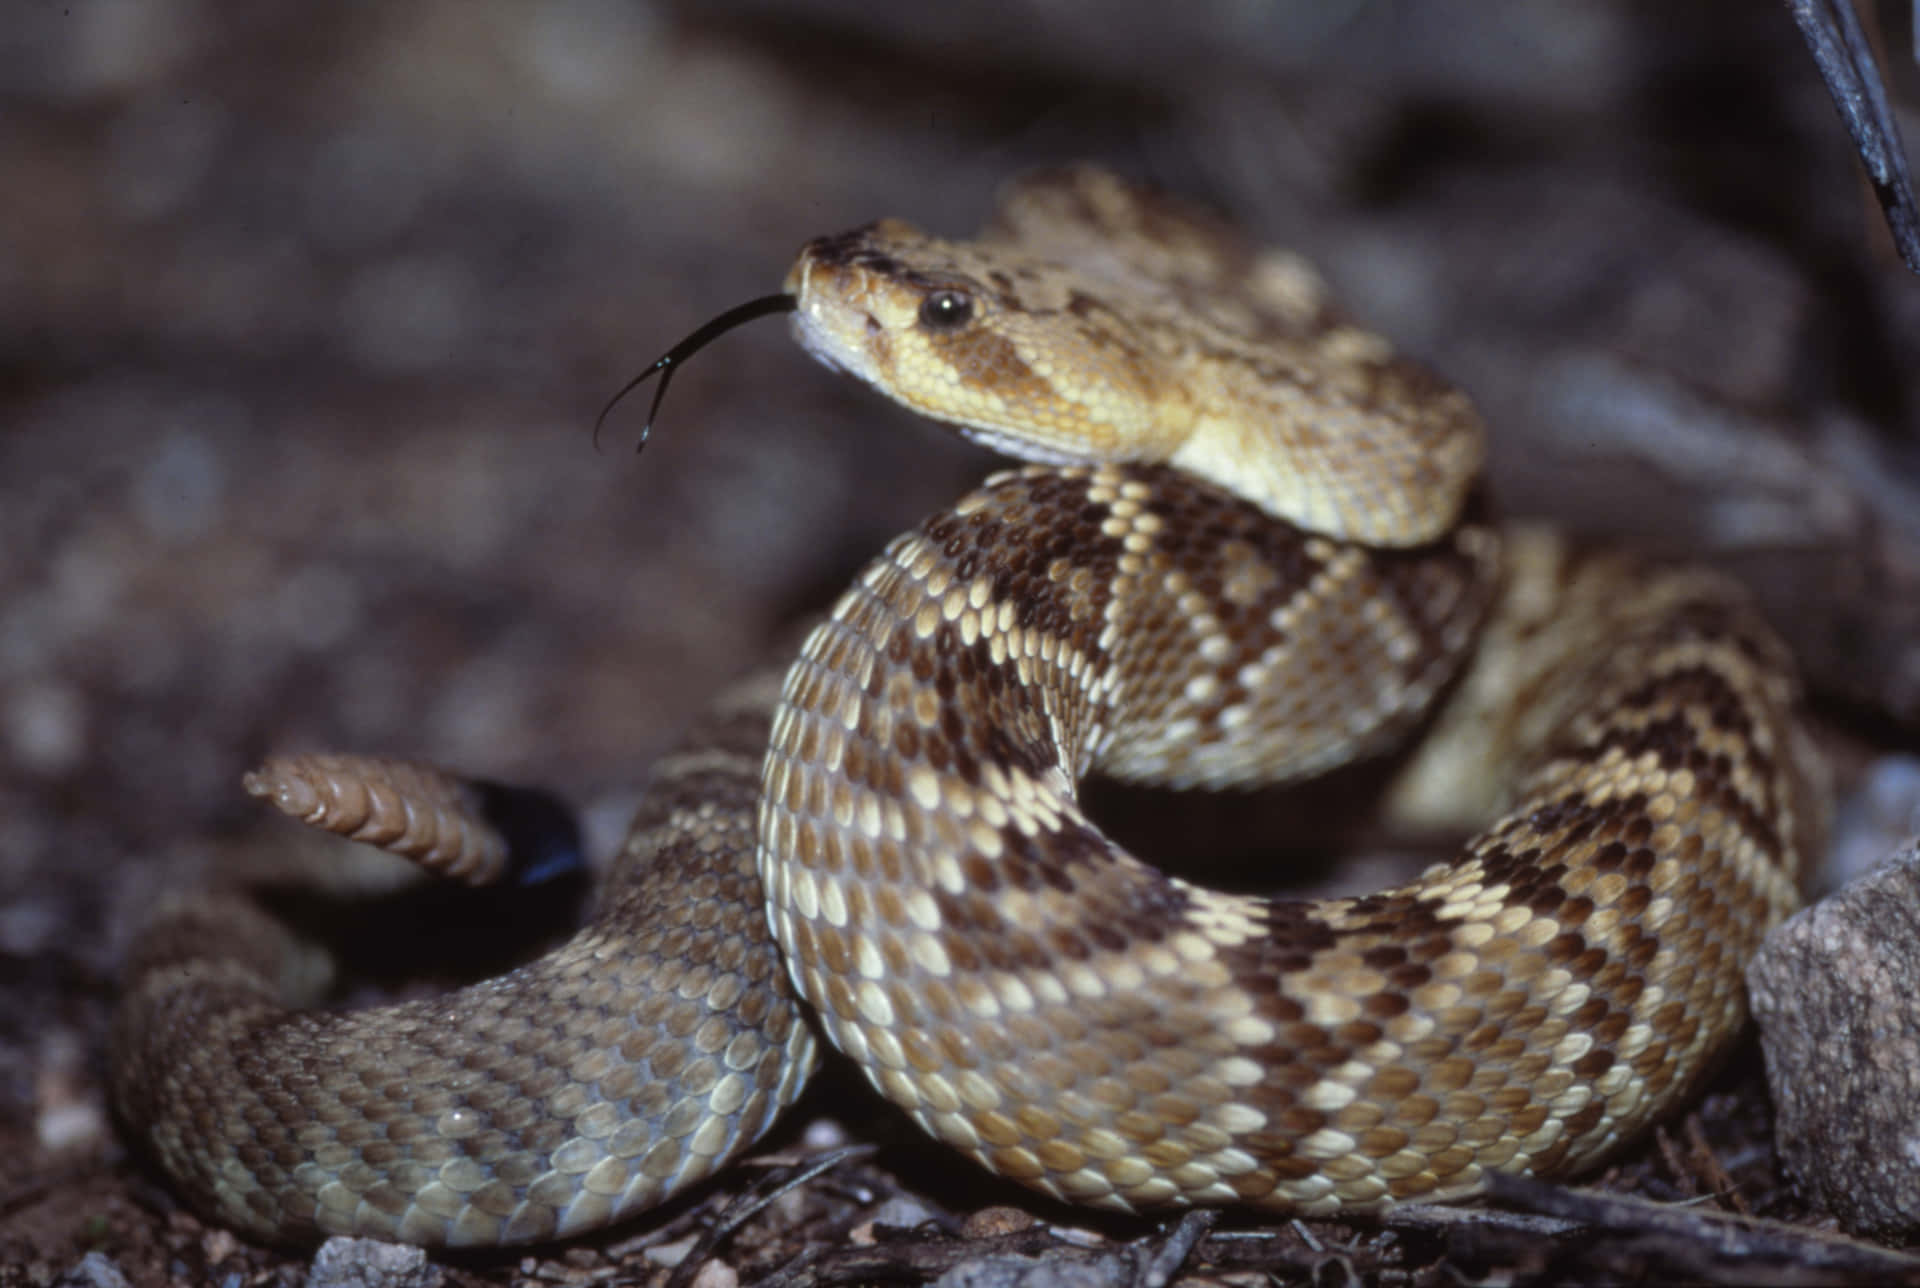 A Rattlesnake Is Sitting On The Ground